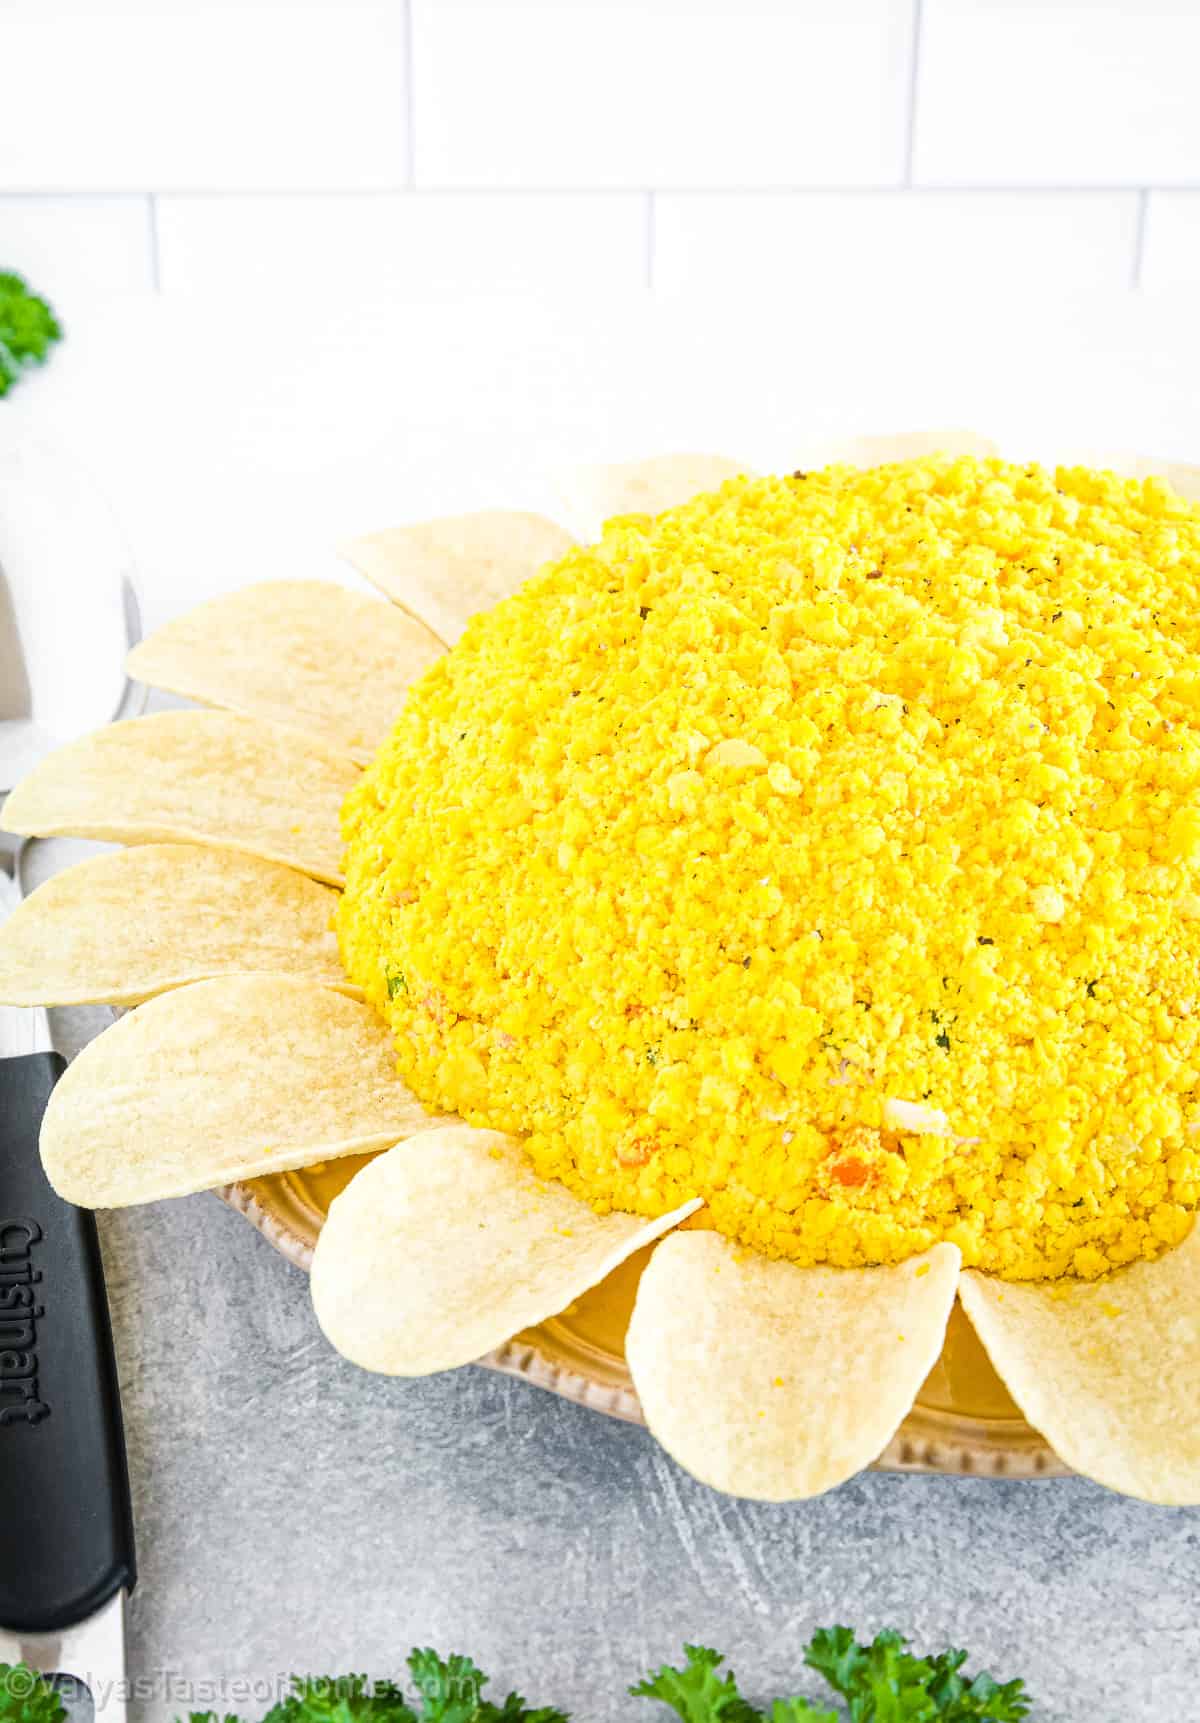 Light, refreshing, and nourishing, this sunflower salad is not only delicious but also healthy, making it the perfect choice for a relaxed afternoon lunch or as a side dish to a hearty meal.